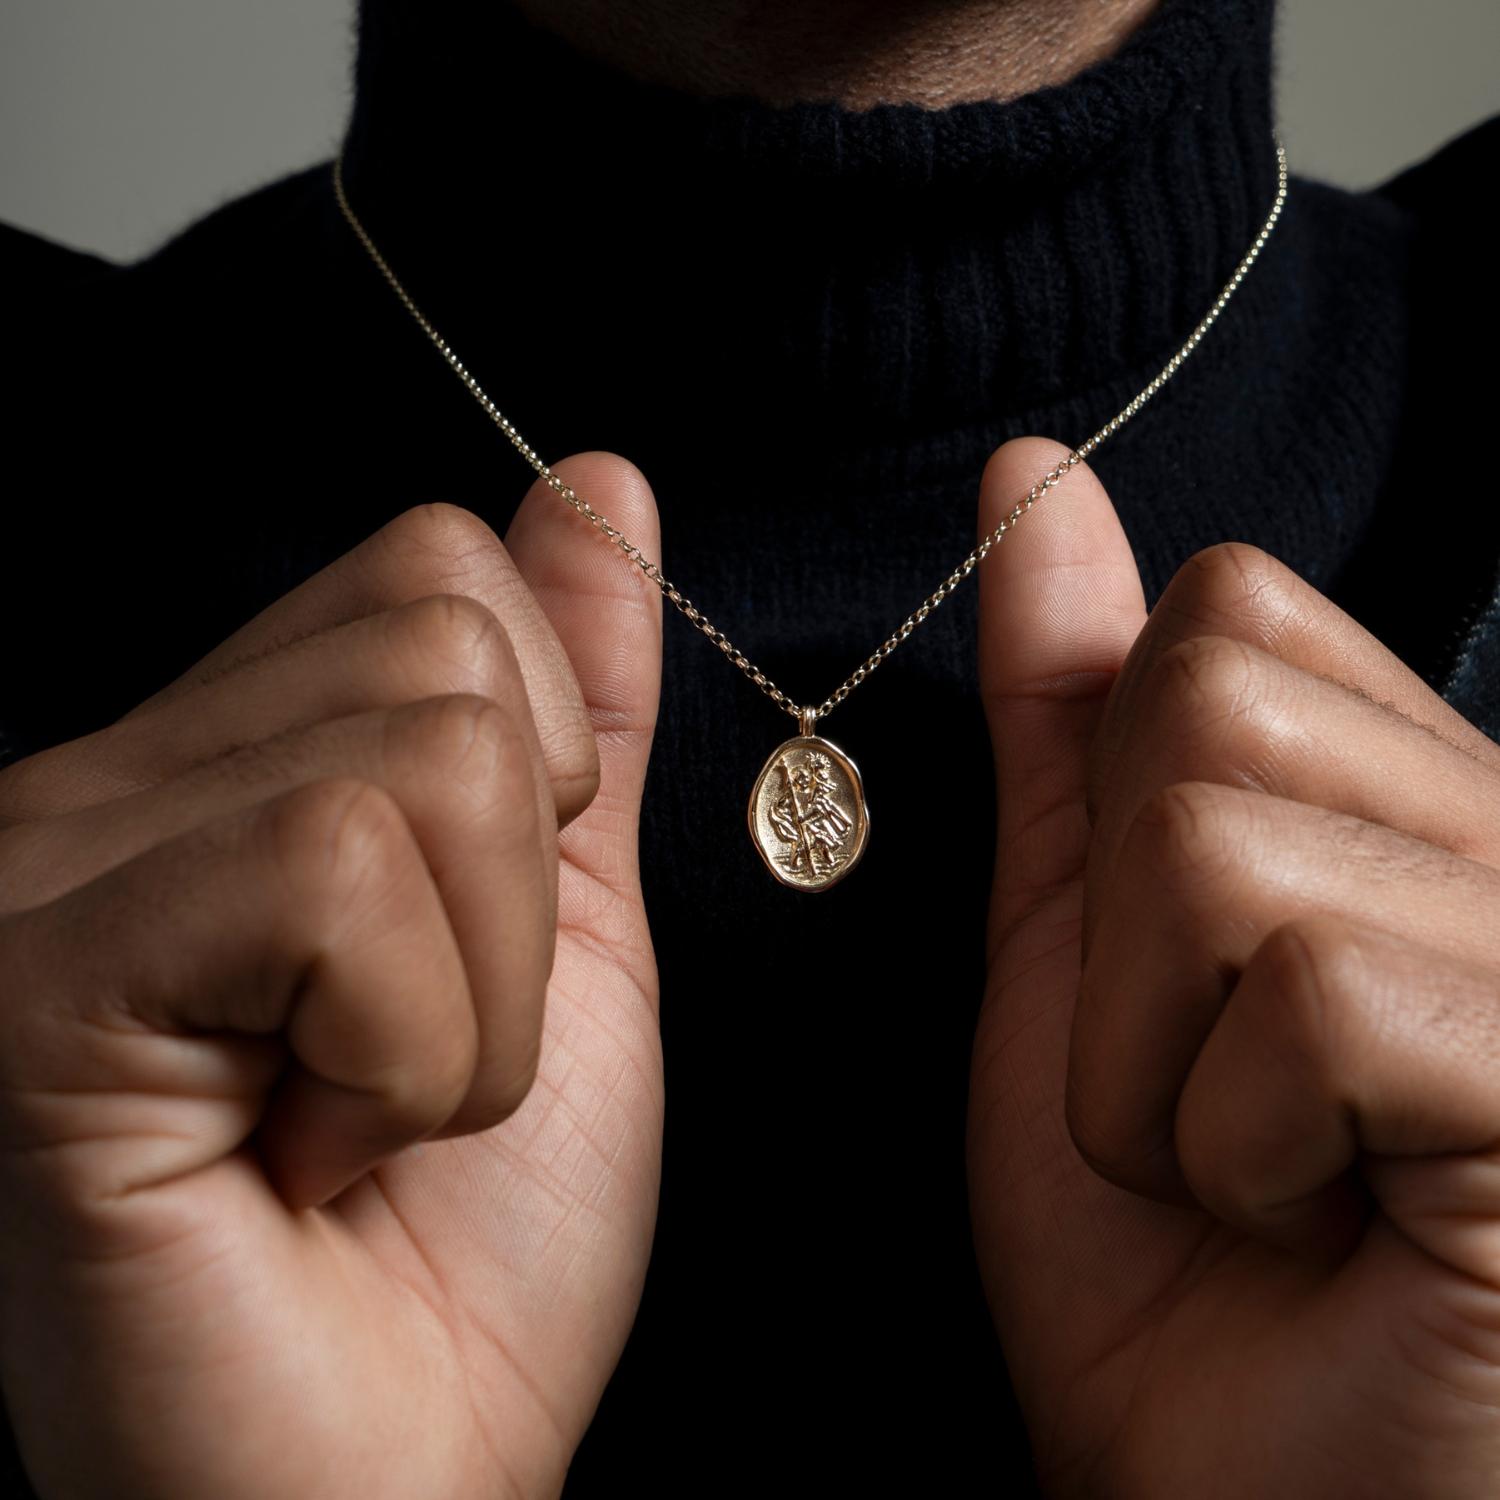 Traditionally given to a loved one who will be travelling, a St. Christopher is seen as a protector to keep them safe on their journey. This 9k solid gold necklace has a St. Christopher suspended on belcher chain - the pendant is part of our